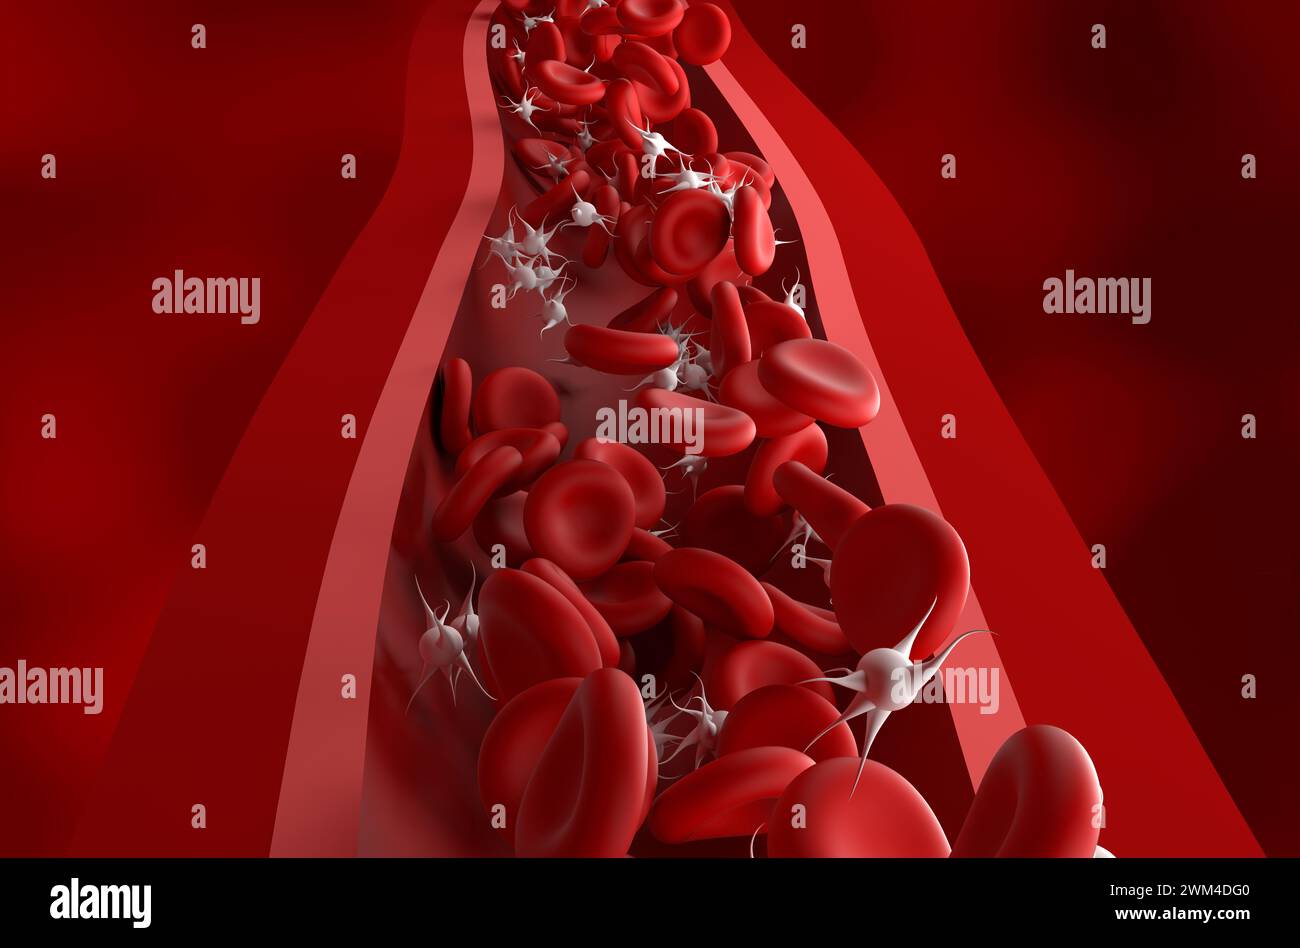 Normal platelet (thrombocytes) count in the blood - front view 3d illustration Stock Photo